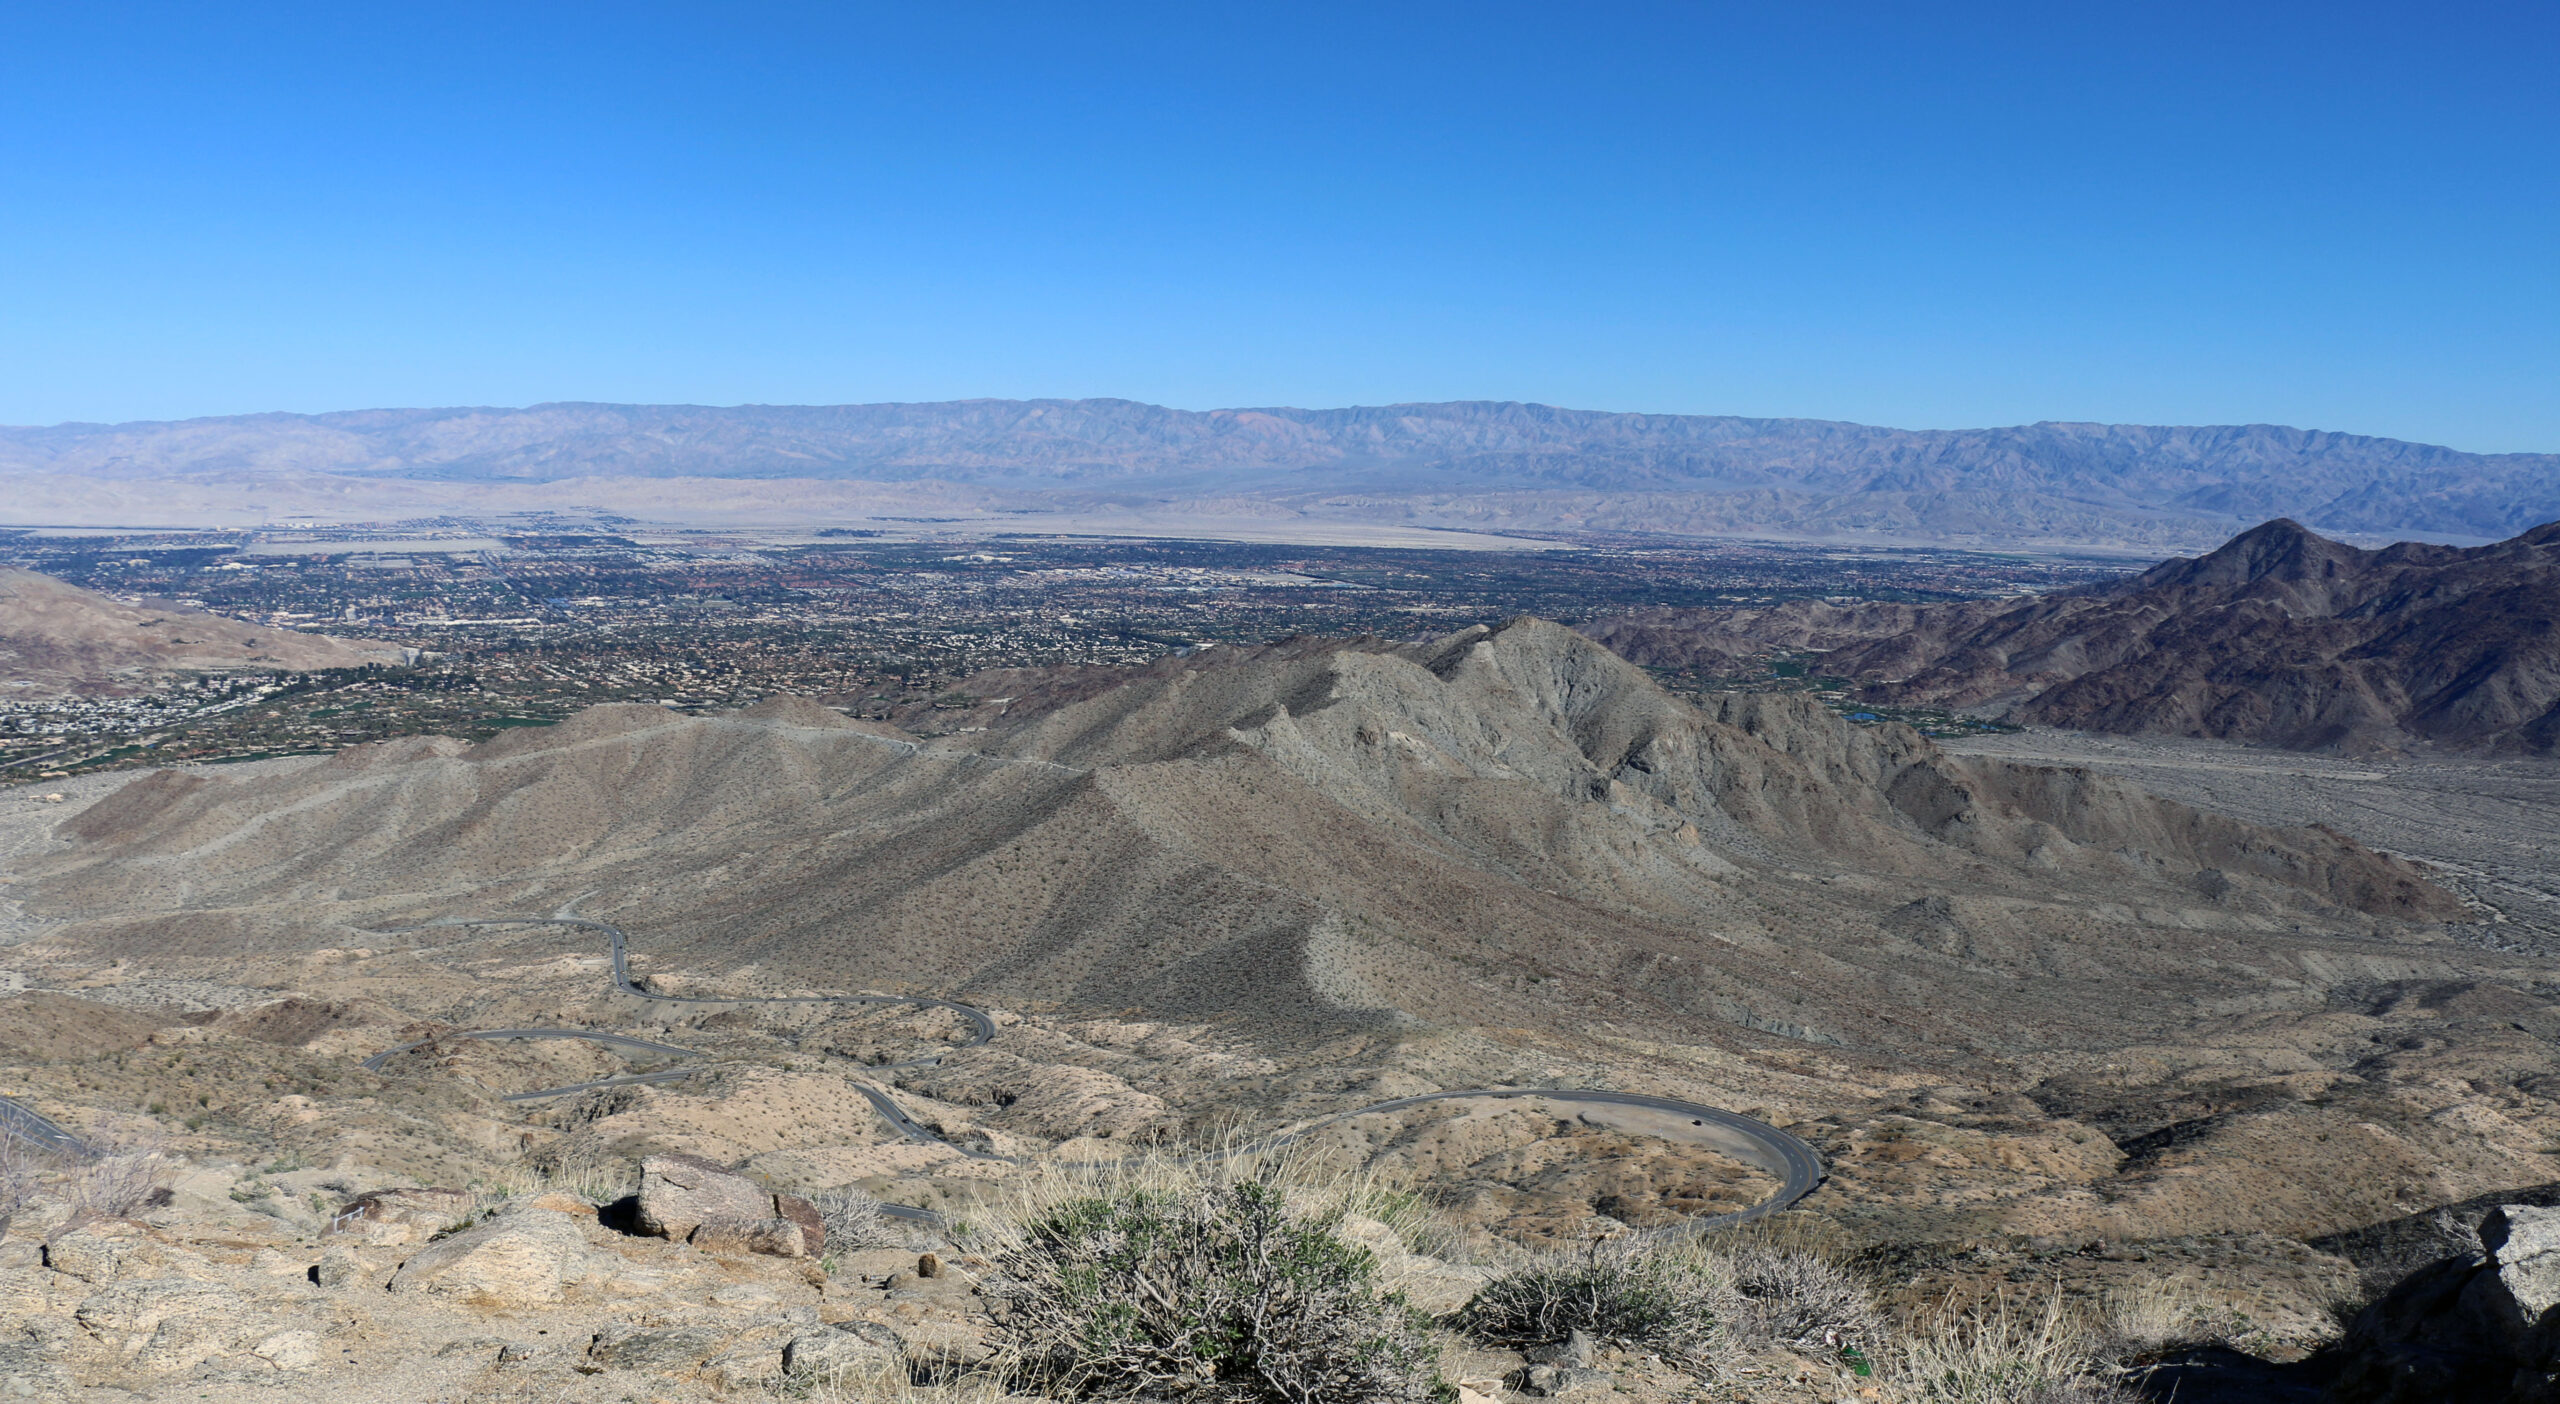 A landscape shot of Coachella Valley's mountains and desert.